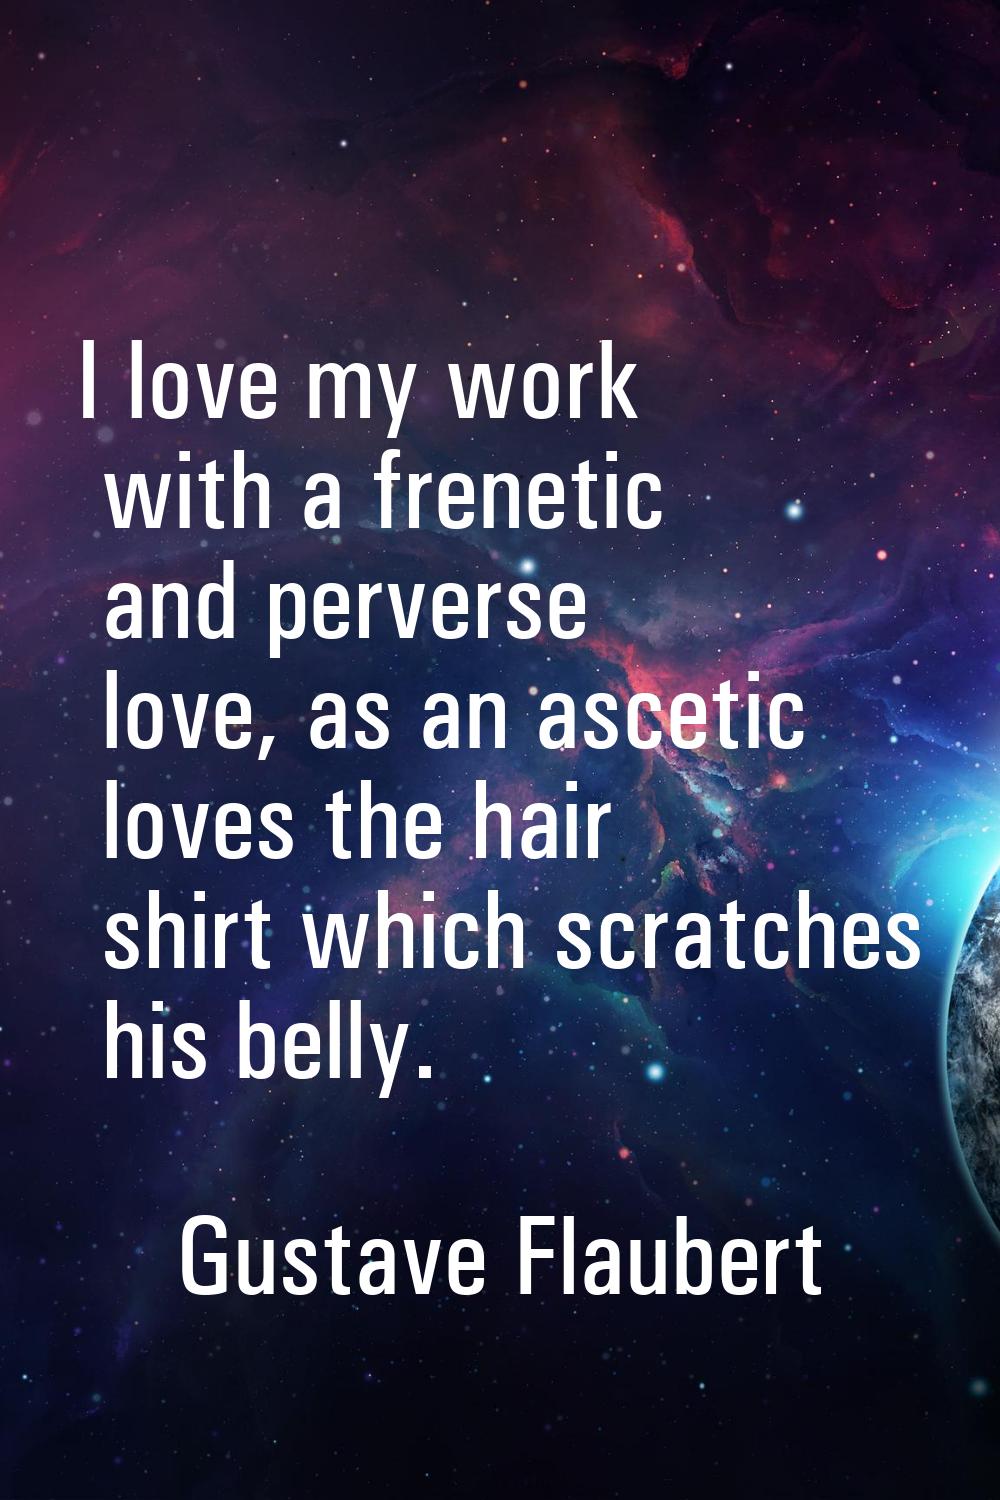 I love my work with a frenetic and perverse love, as an ascetic loves the hair shirt which scratche